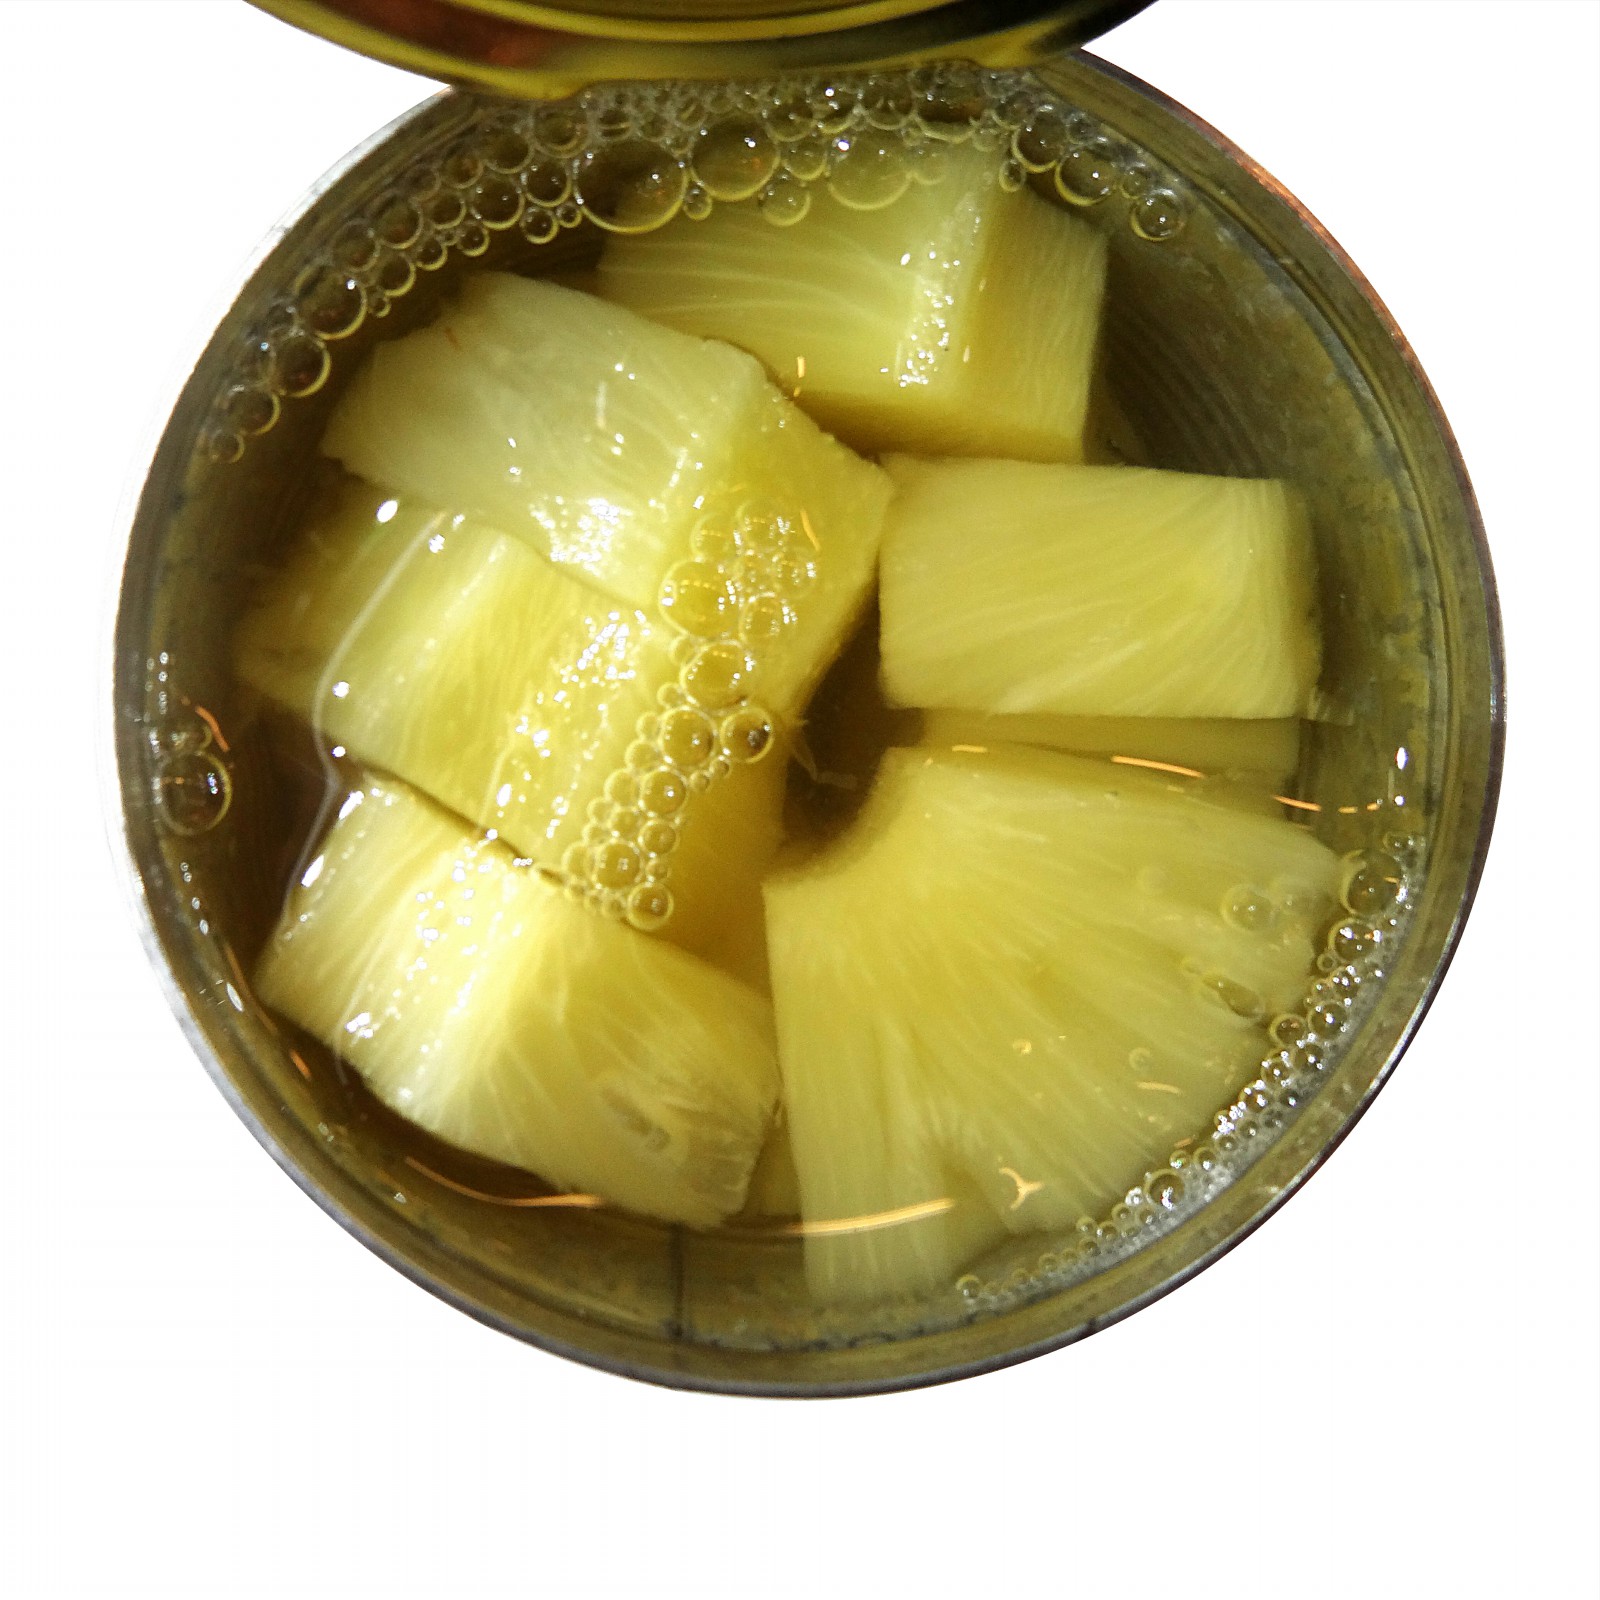 Canned pineapple tidbits